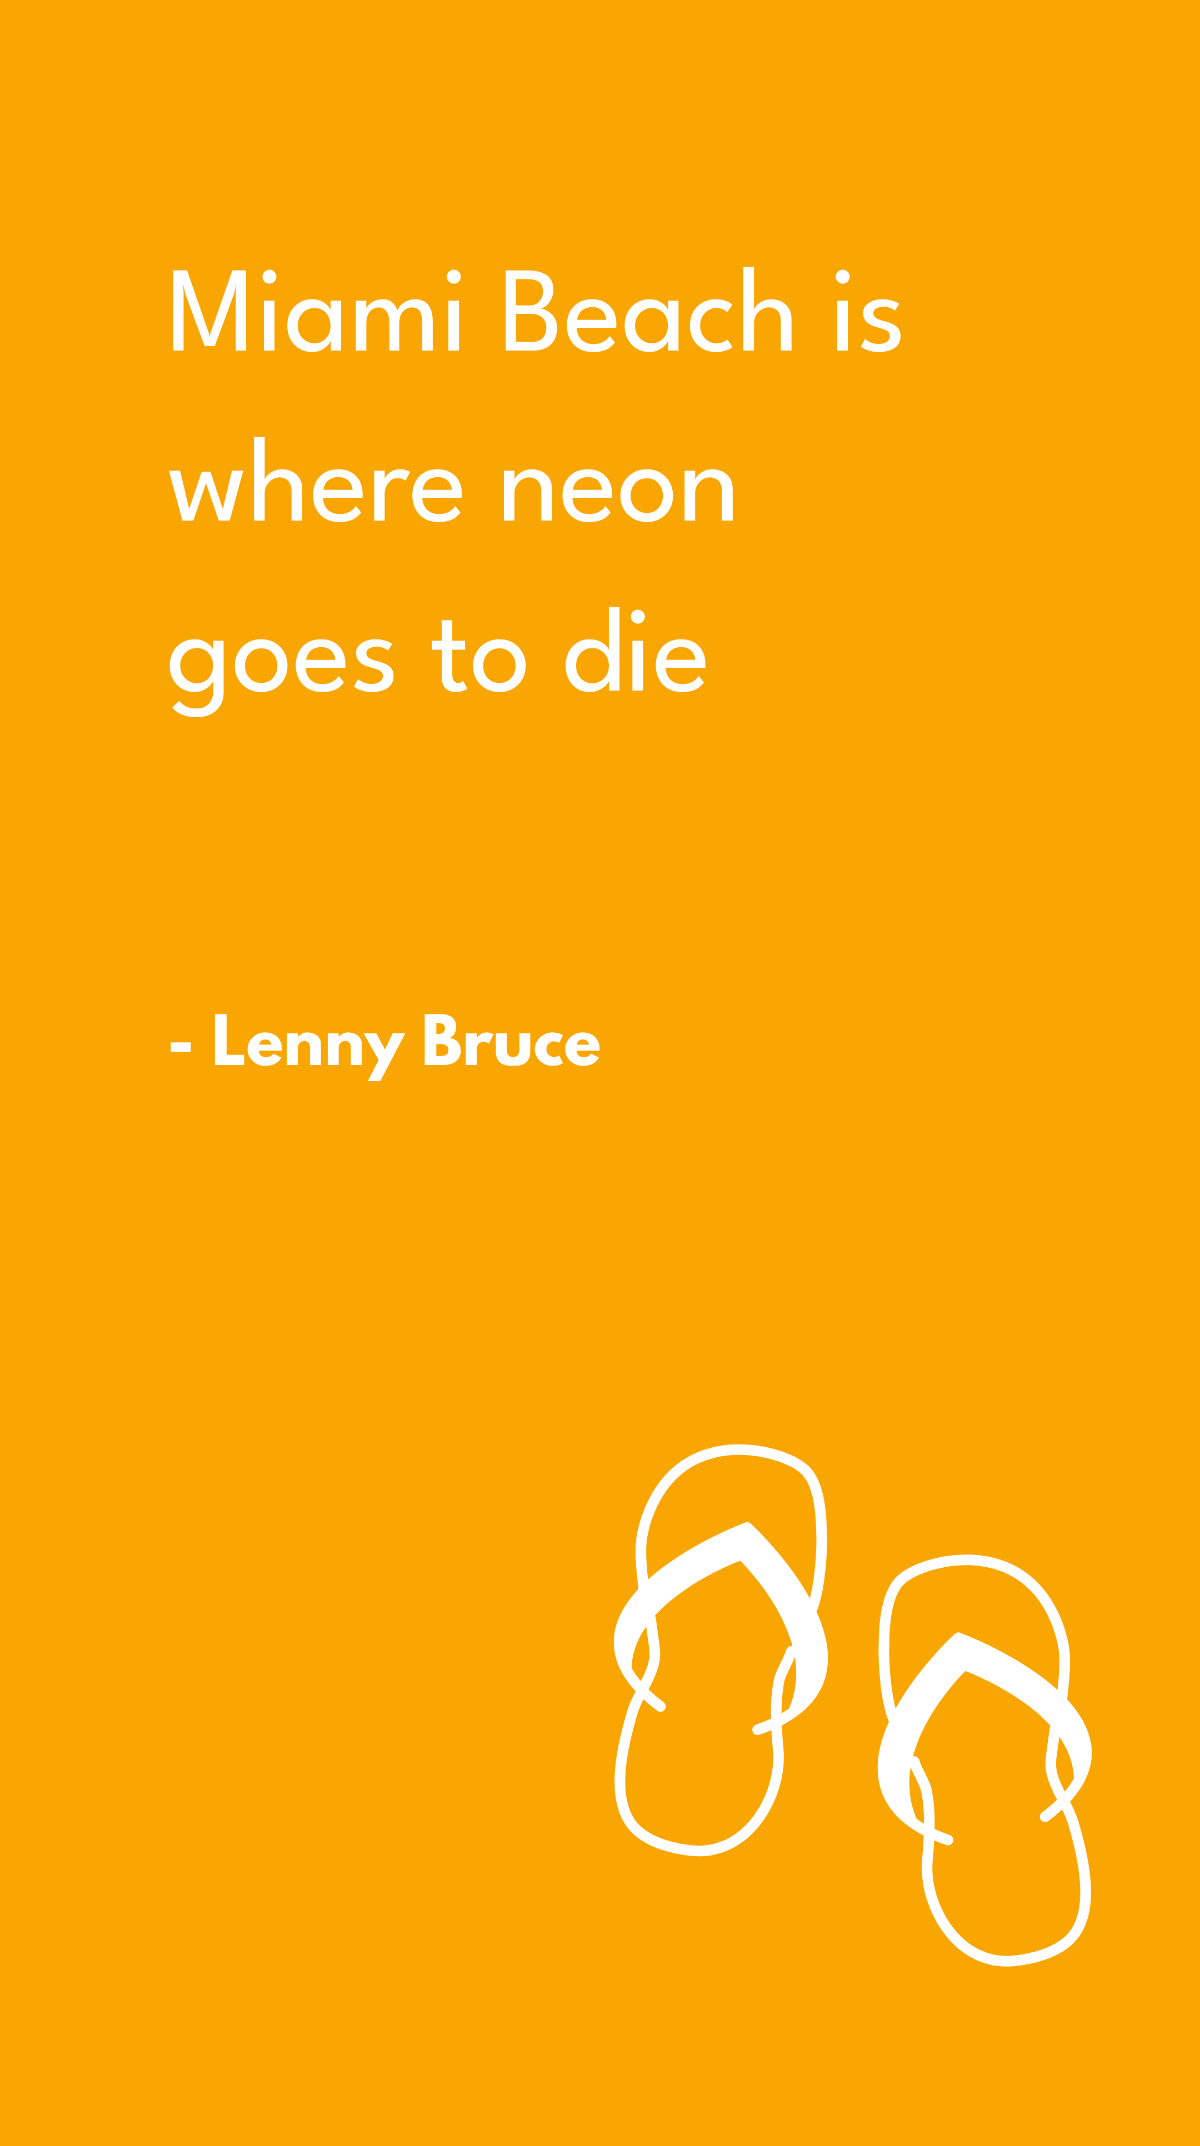 Free Lenny Bruce - Miami Beach is where neon goes to die Template